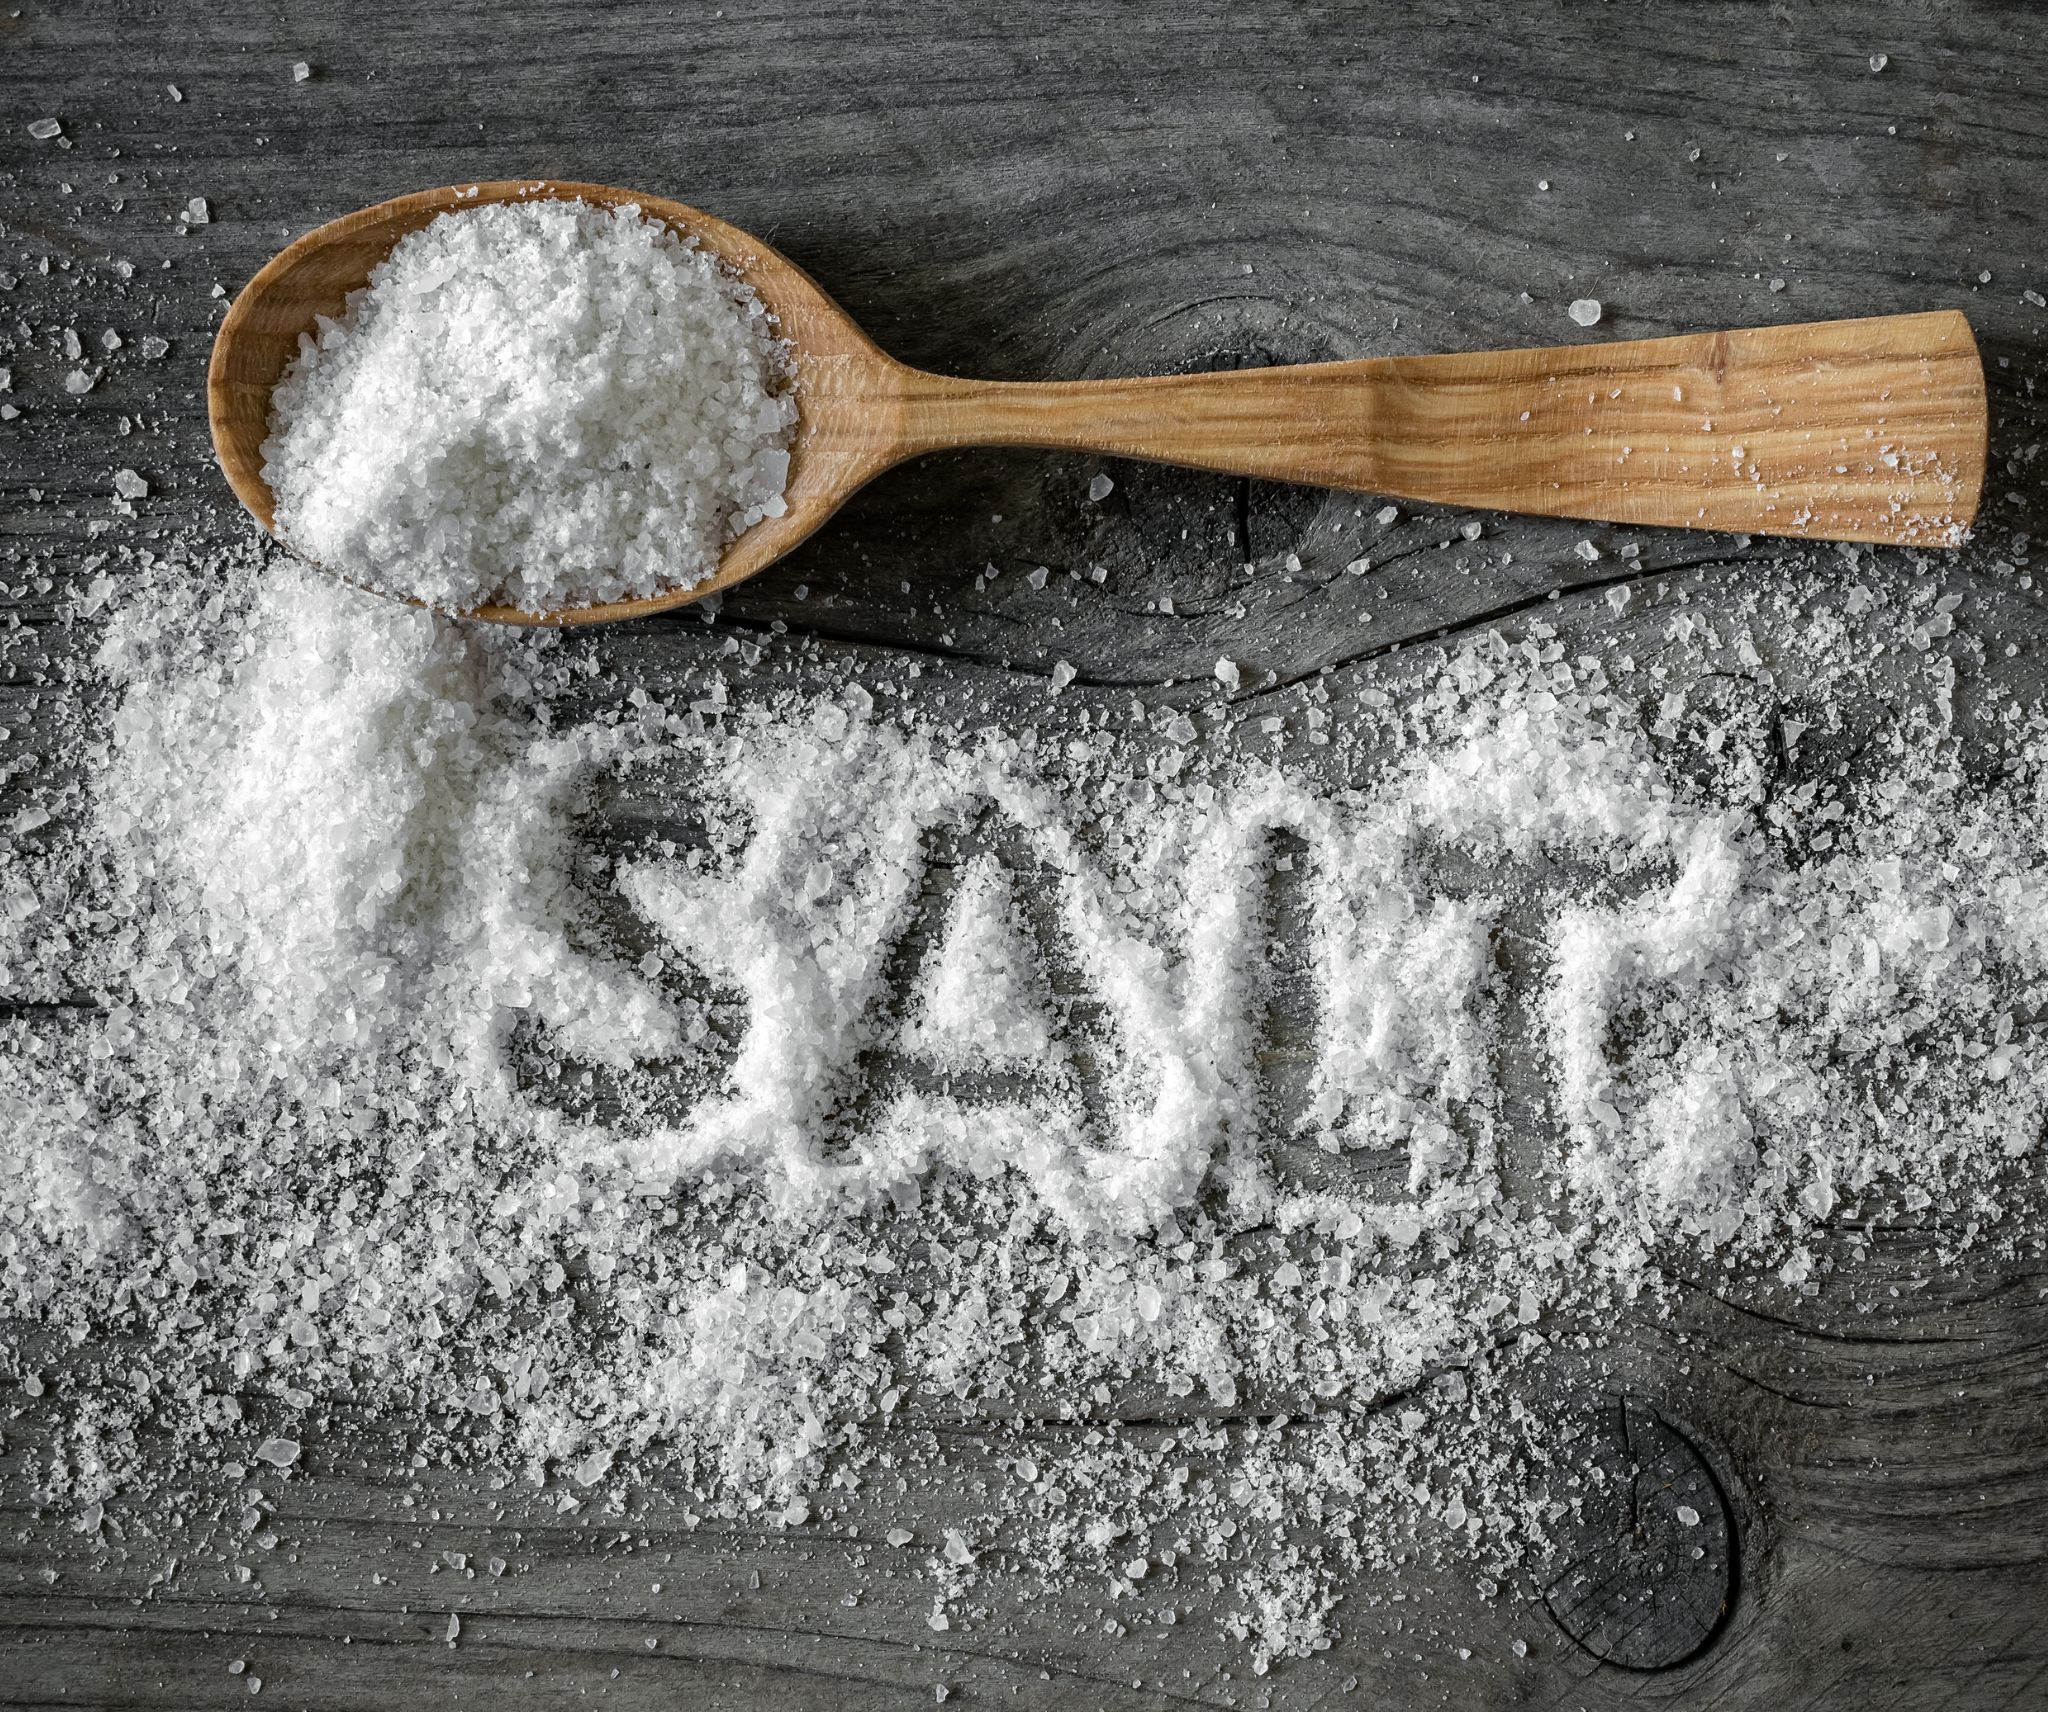 How To Fix Over Salted Food Easily: 6 Ways